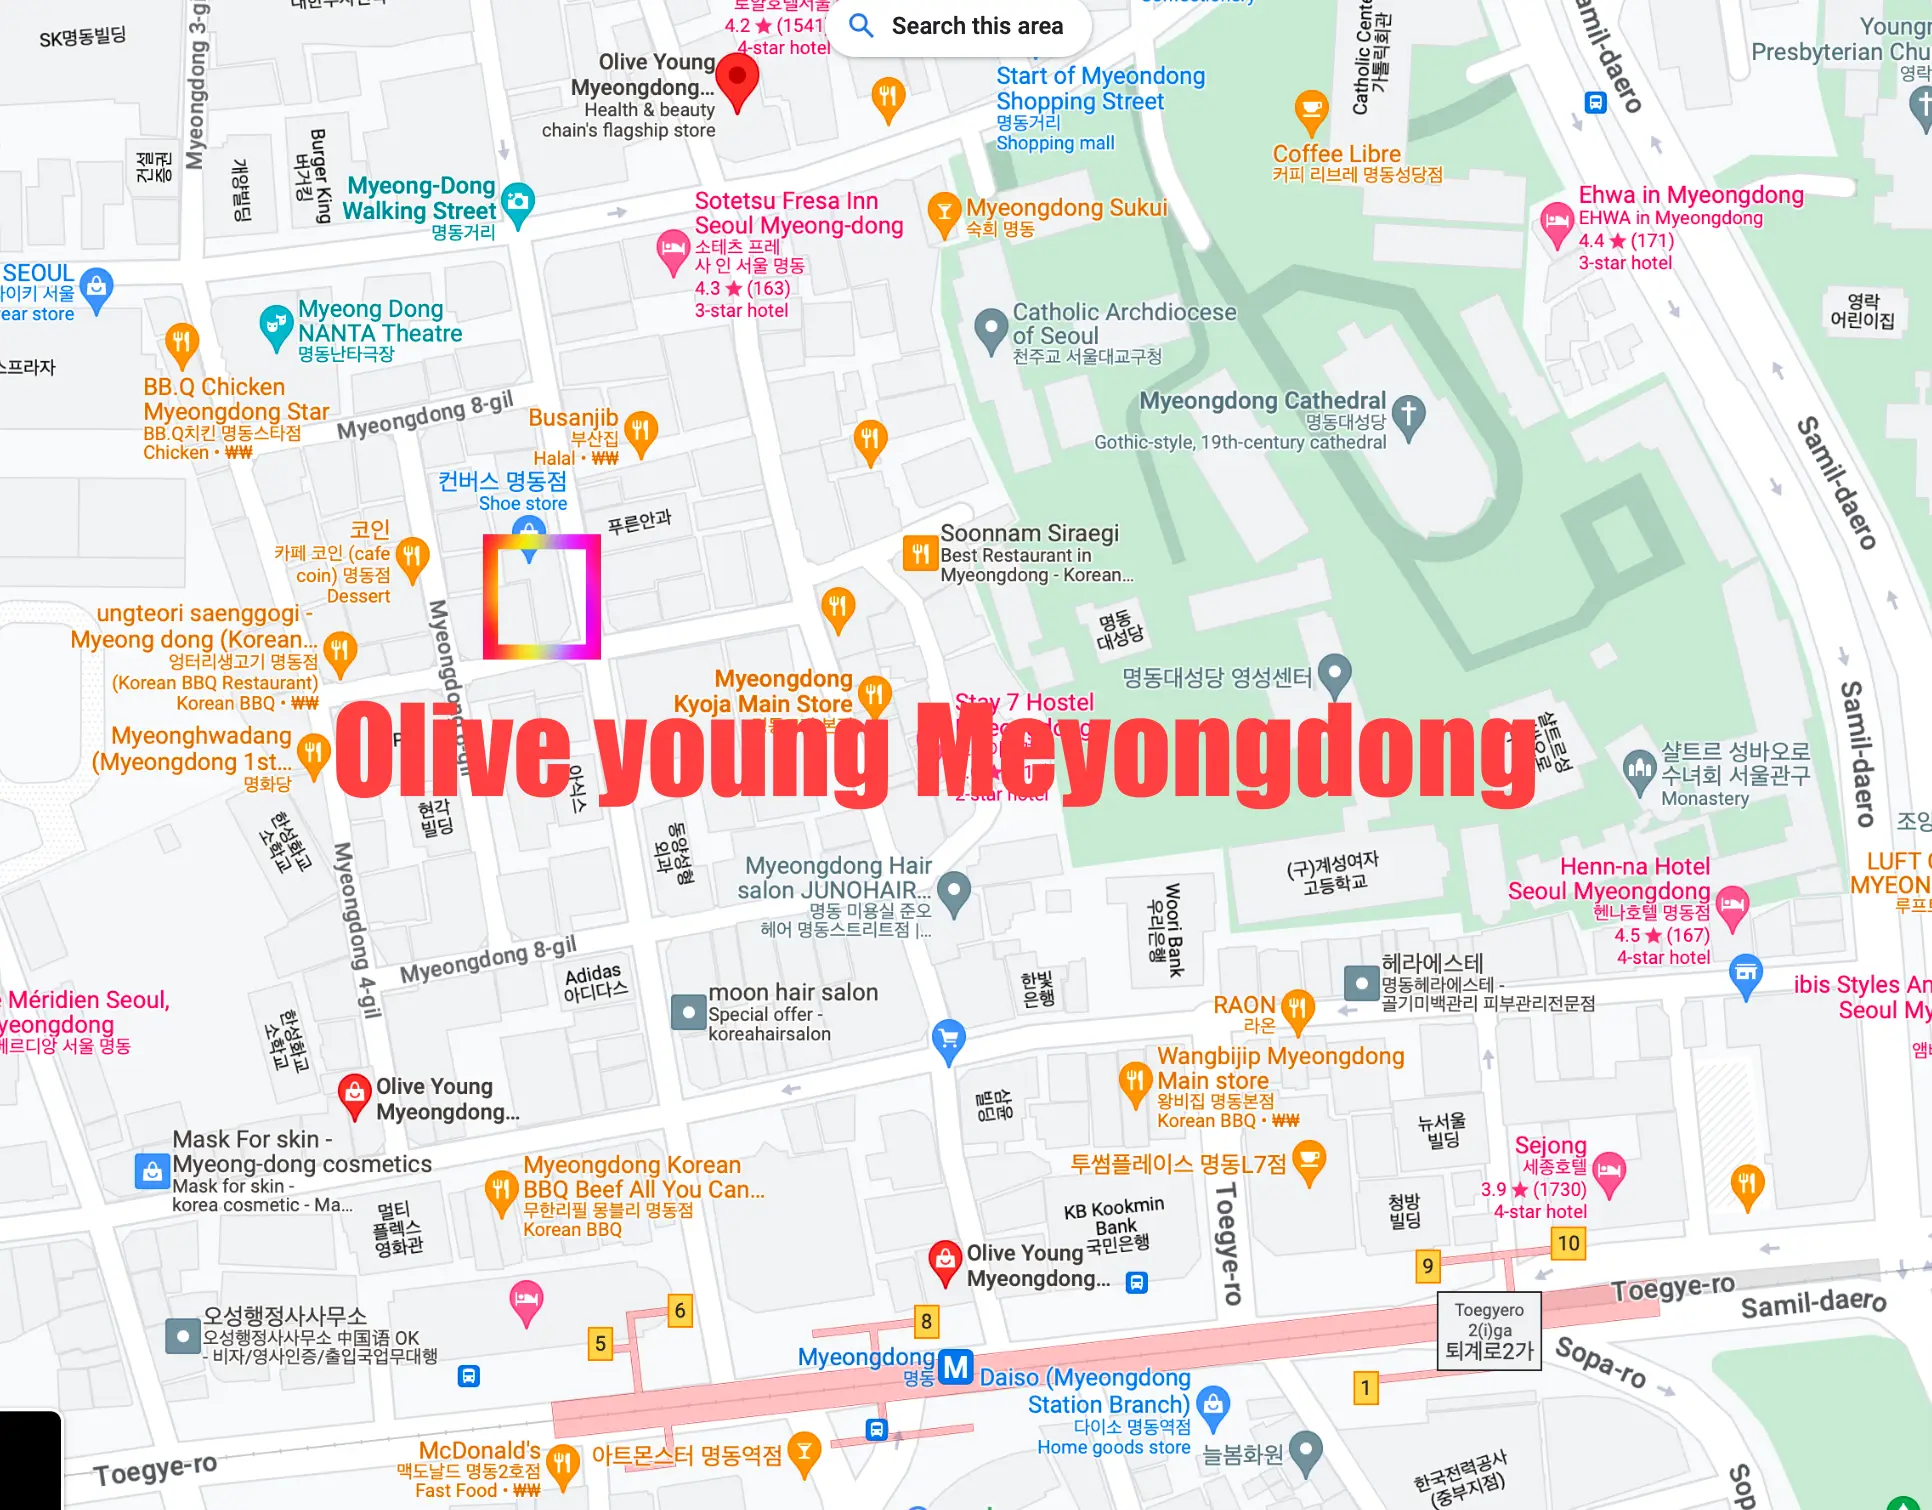 How to get to Olive Young in Myeongdong